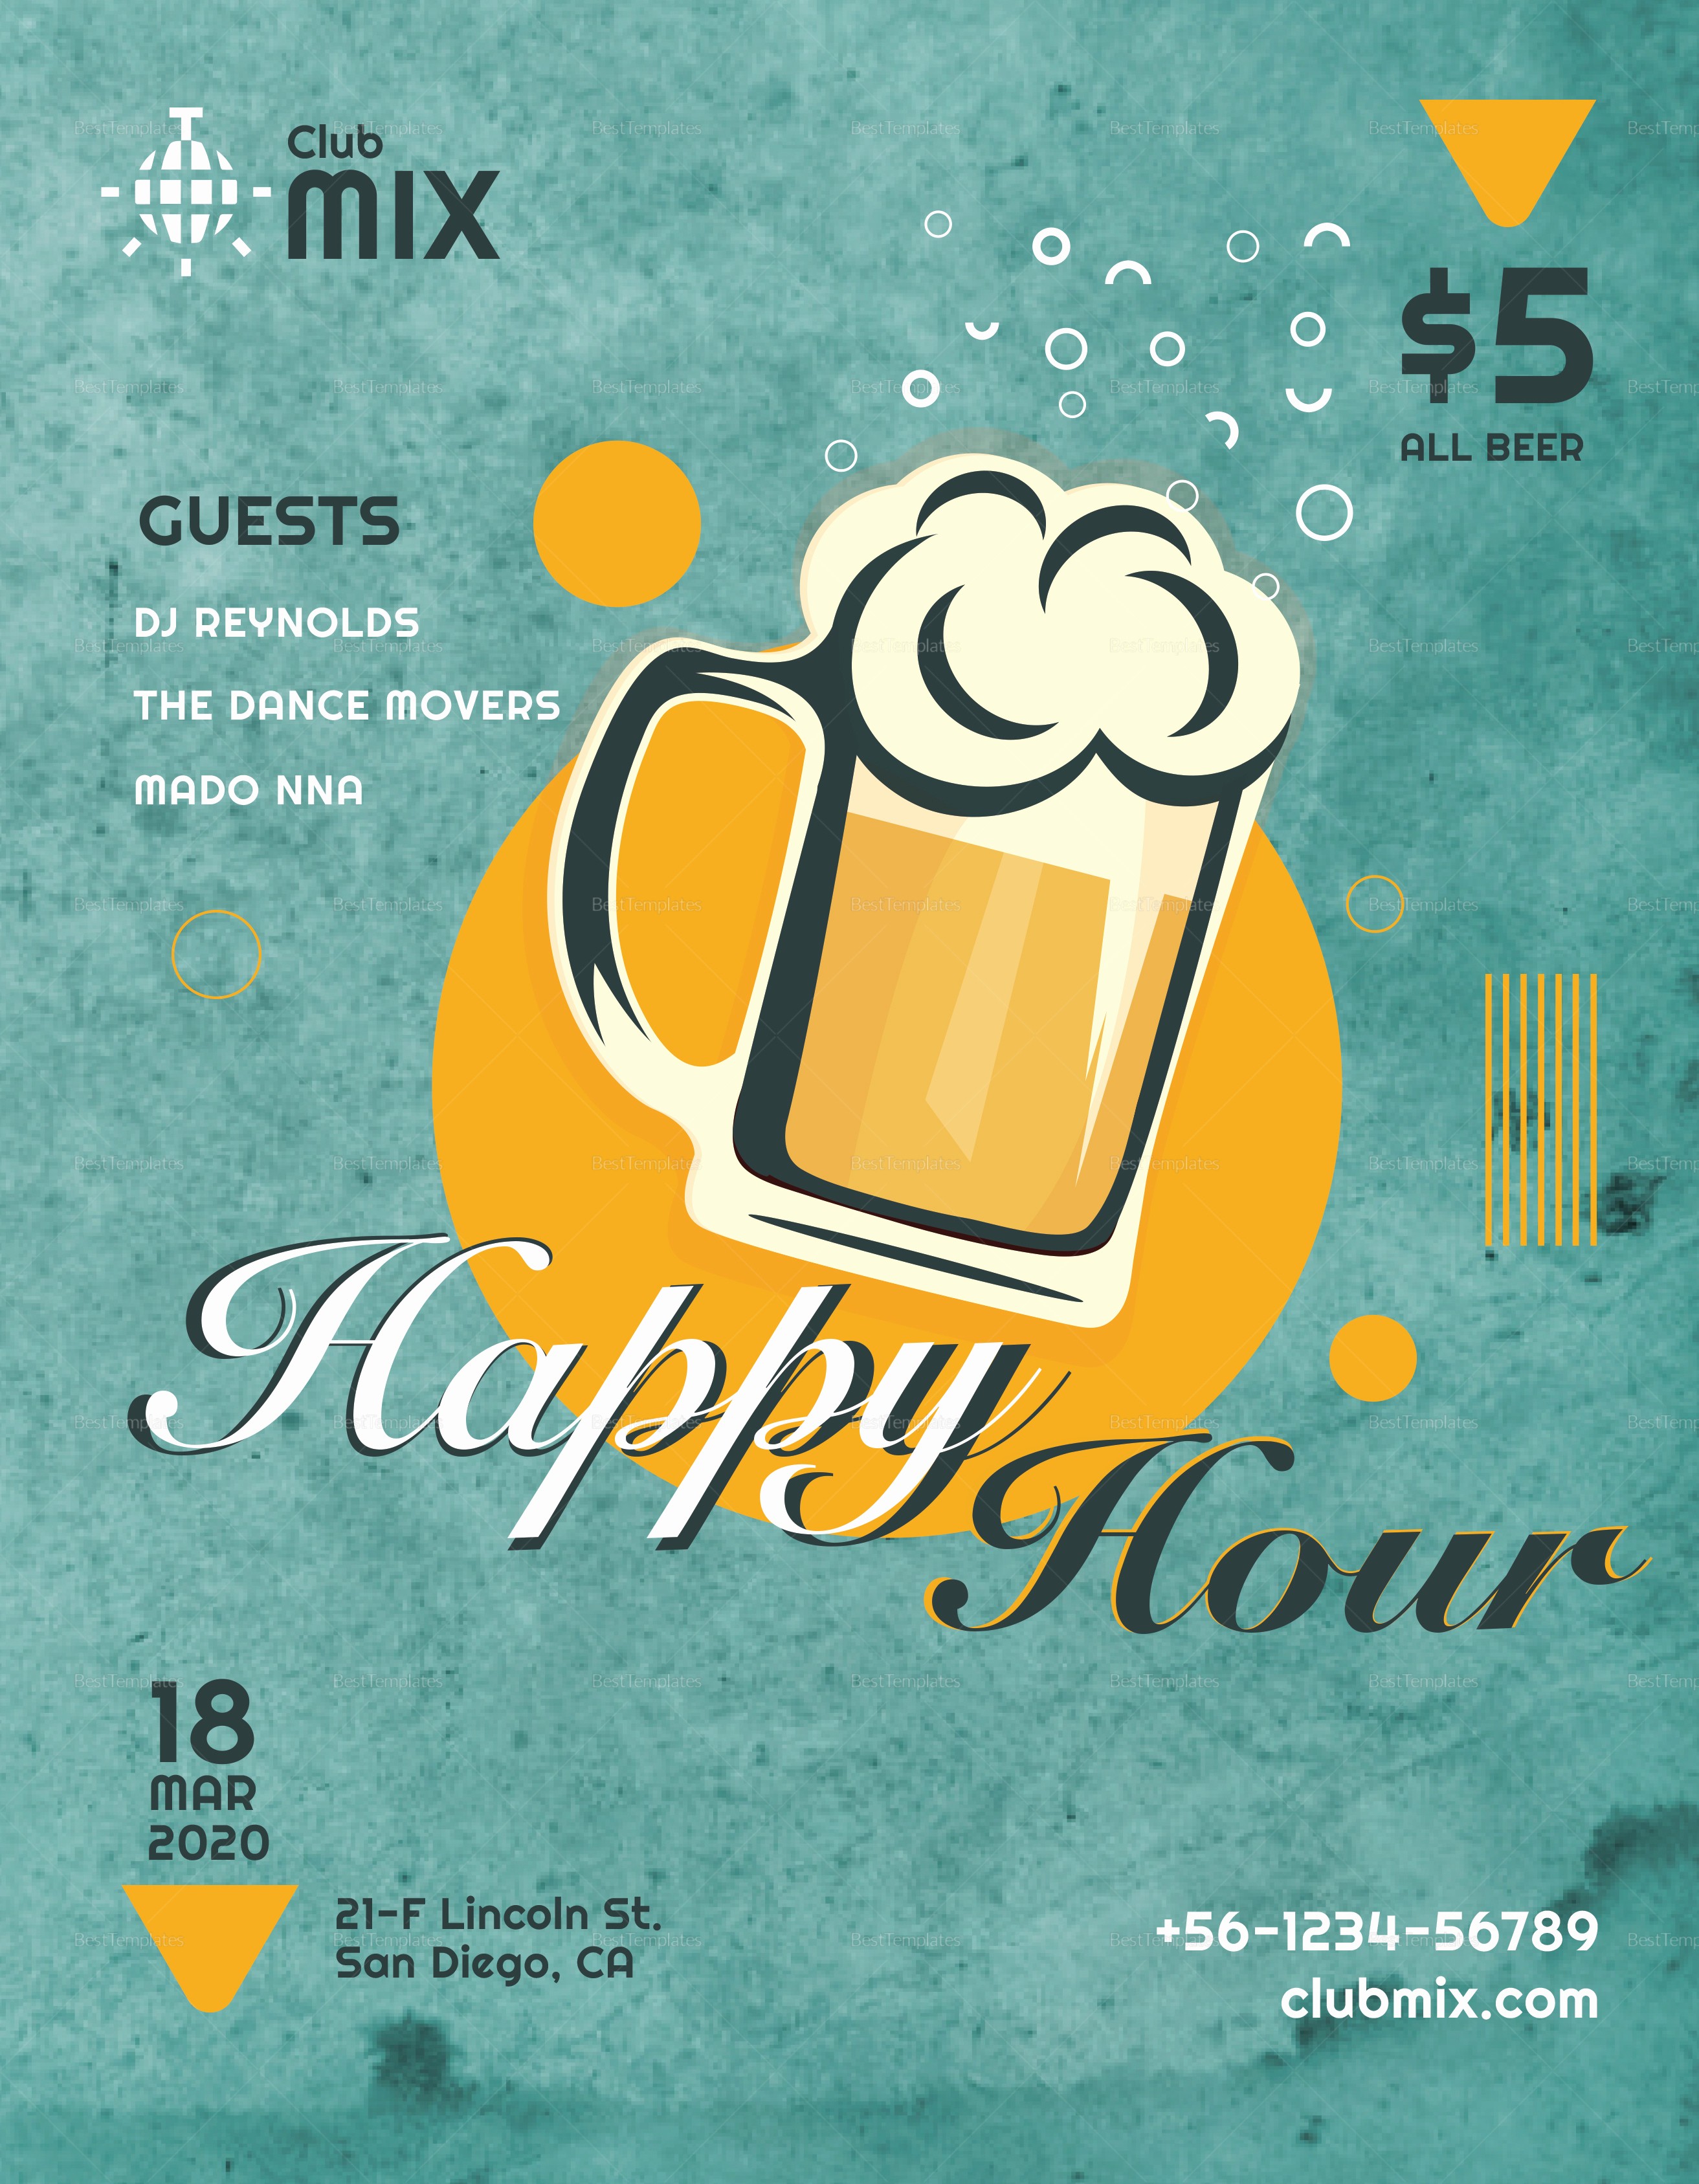 Happy Hour Flyer Template Free Lovely Vintage Happy Hour Flyer Design Template In Psd Word